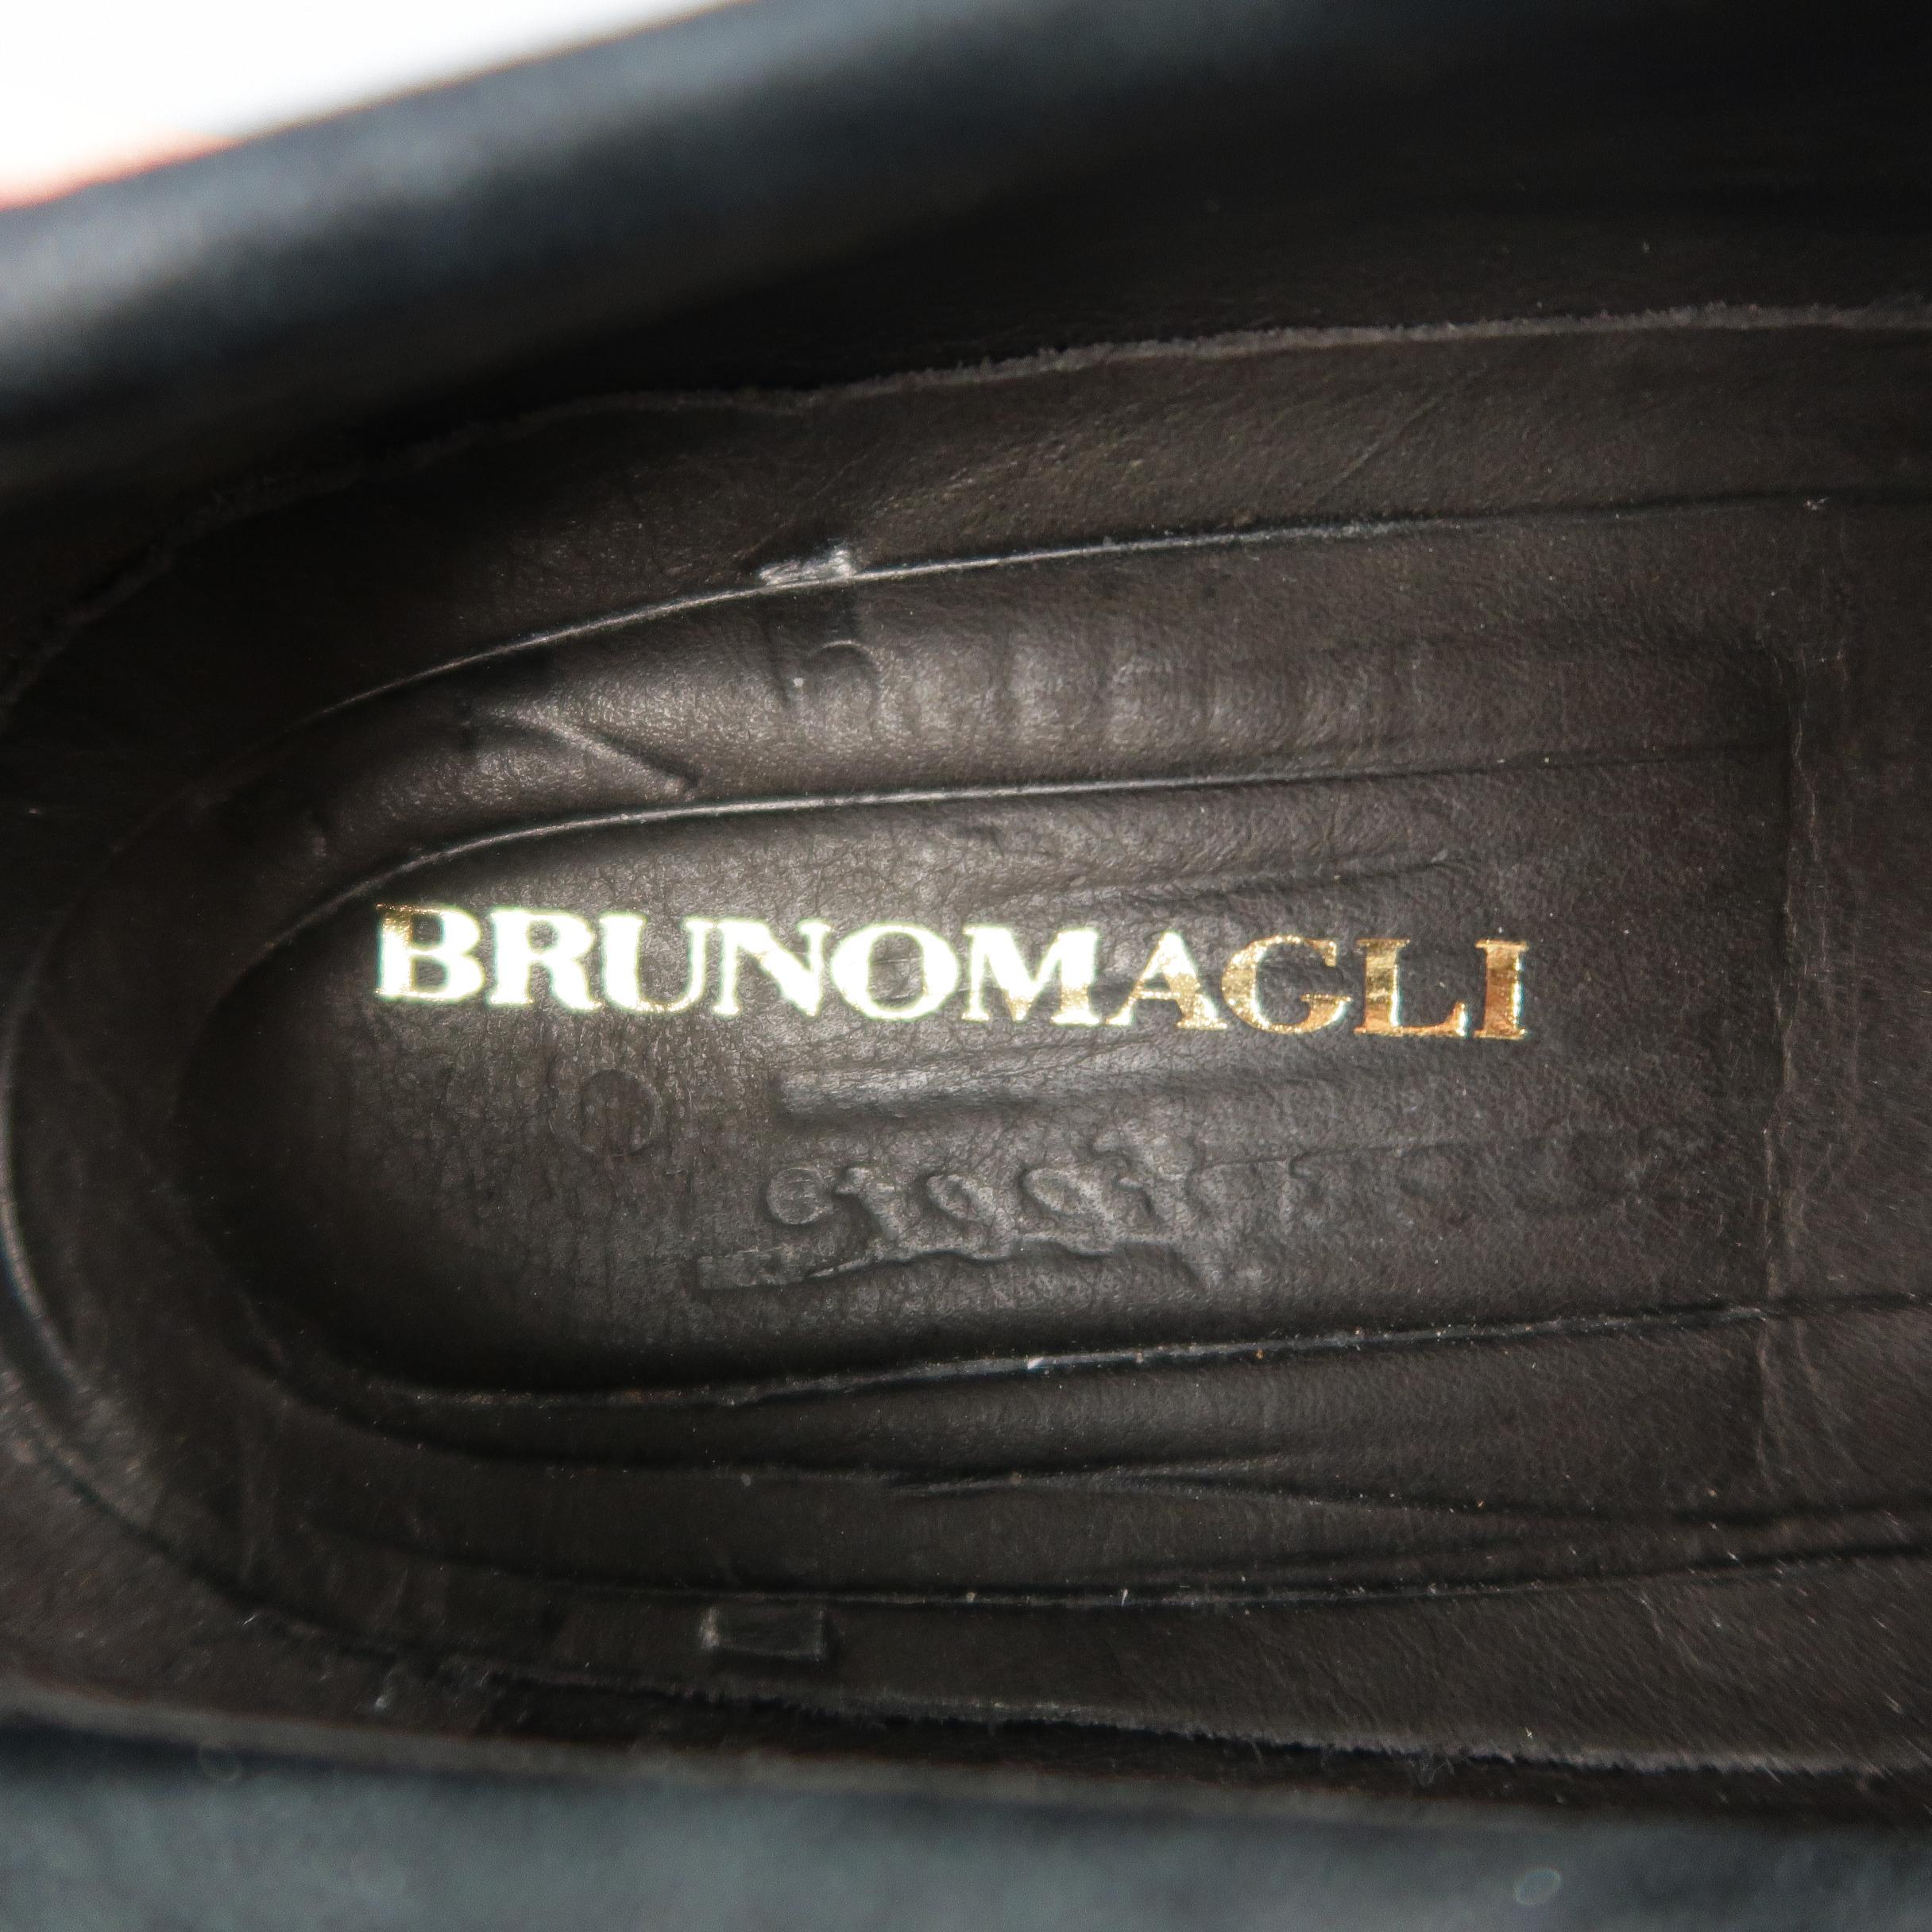 BRUNO MAGLI Size 10.5 Black Suede Penny Loafers Shoes 4